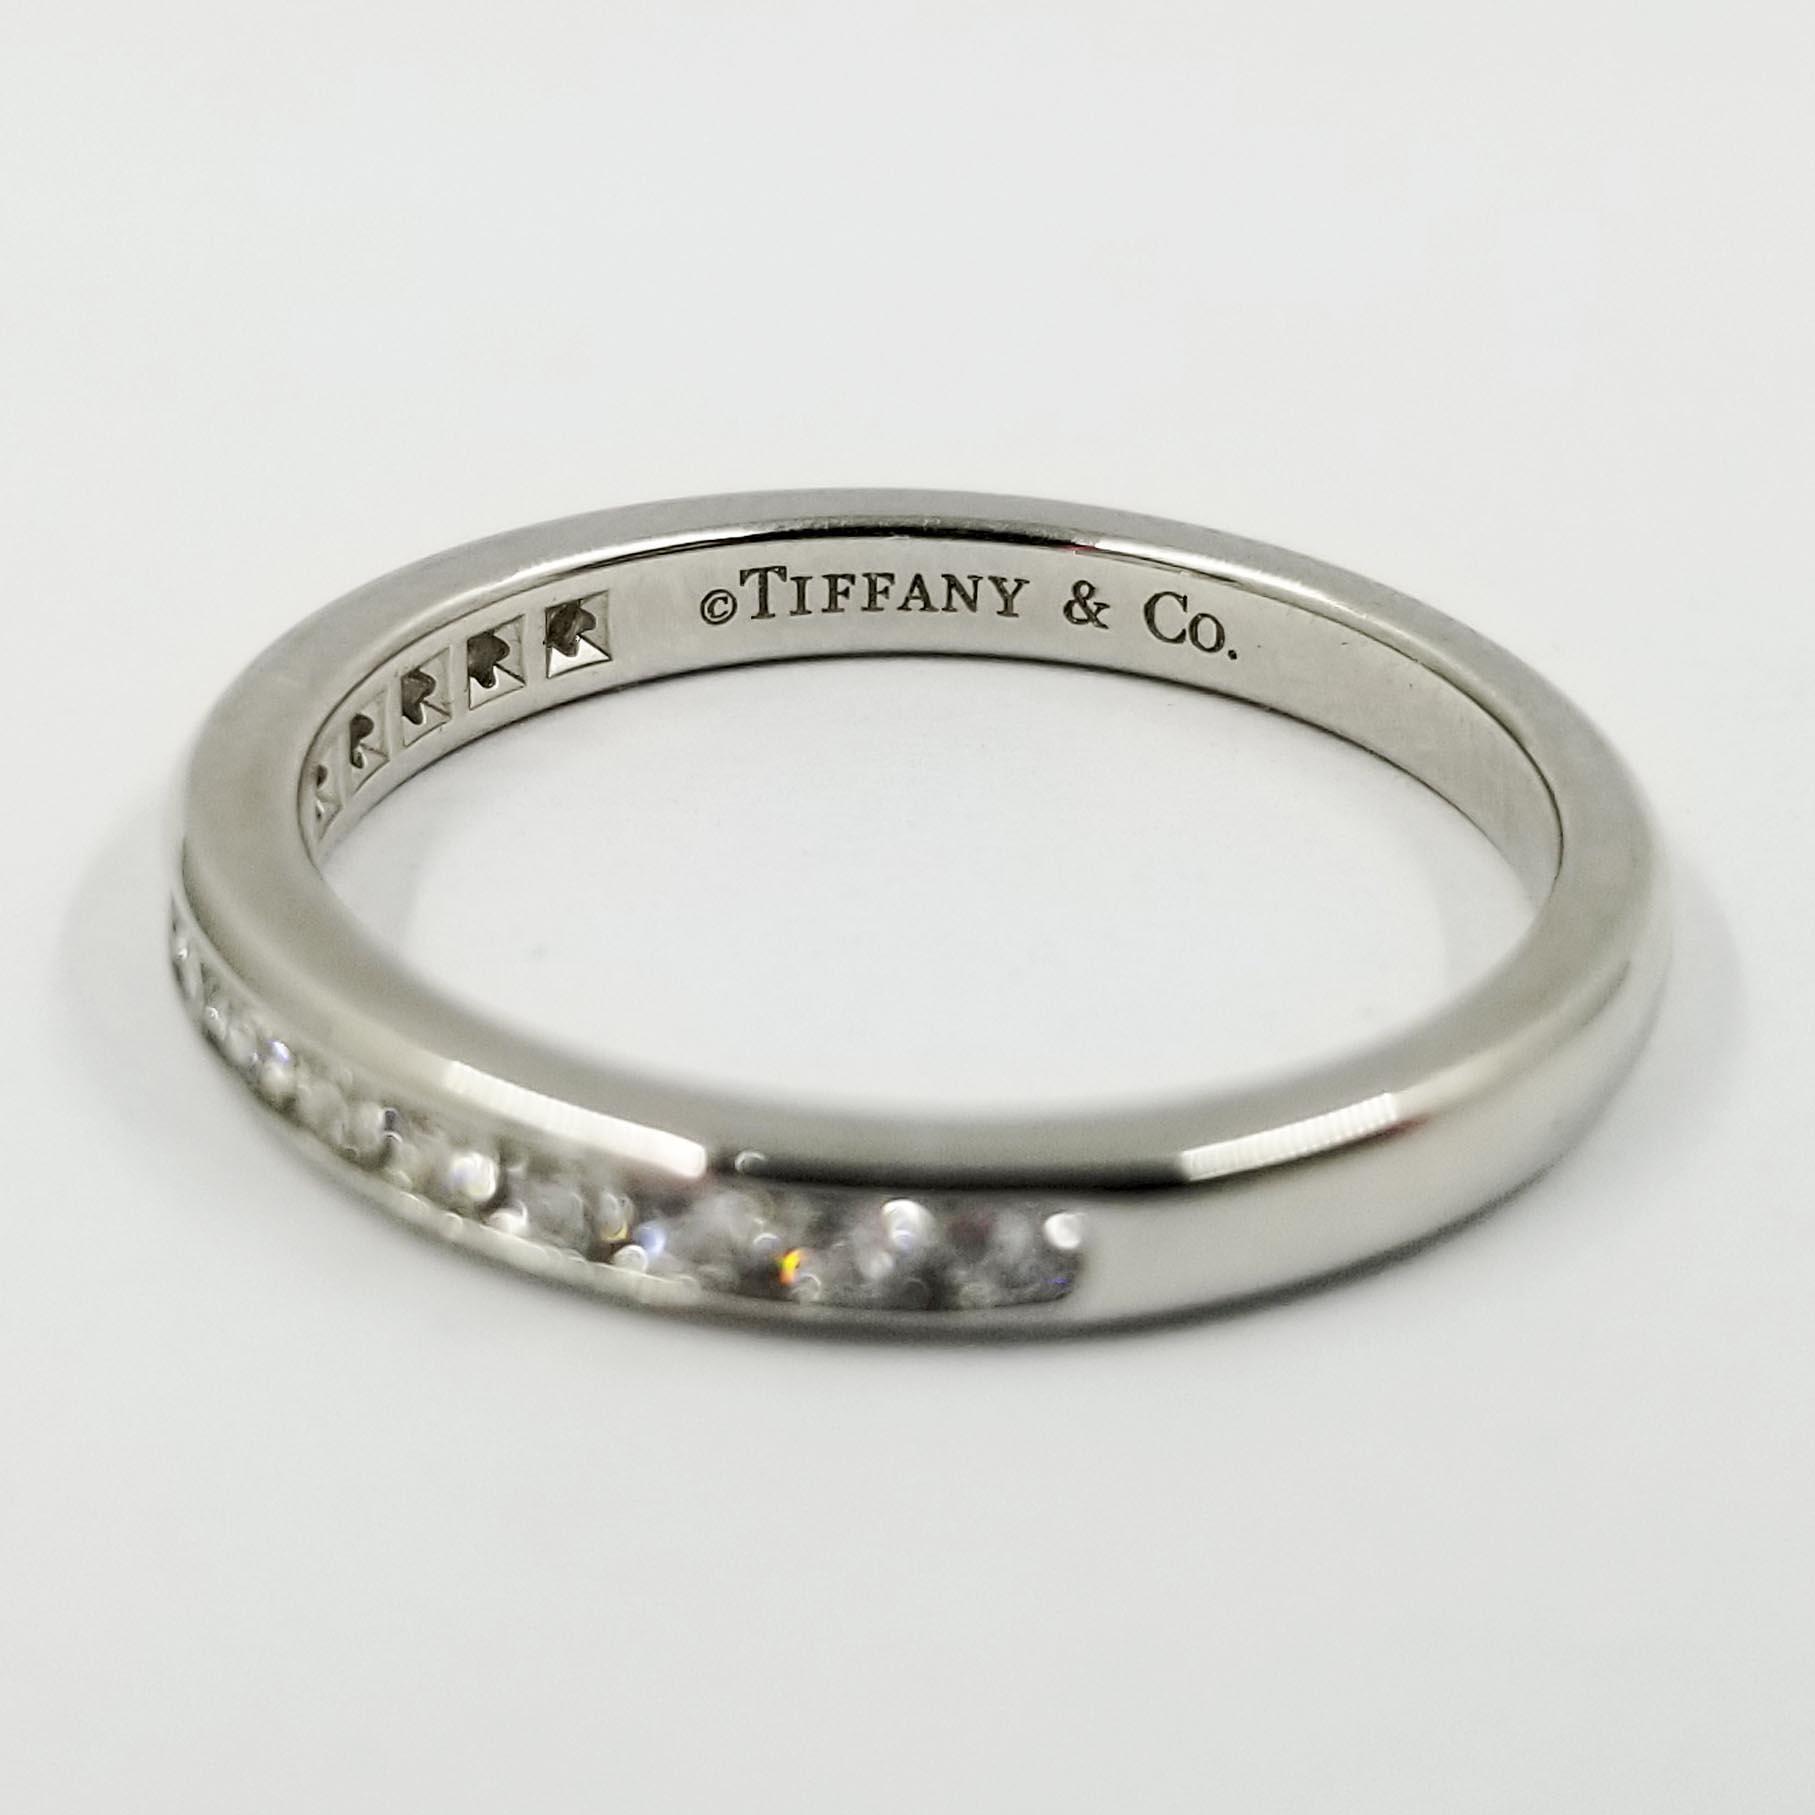 This classic diamond band is crafted in platinum by Tiffany & Co. It features 15 channel set round brilliant cut diamonds of F color and VVS clarity, approximately 0.25 carat total weight. The interior is stamped PT950. Finger size is currently 6;